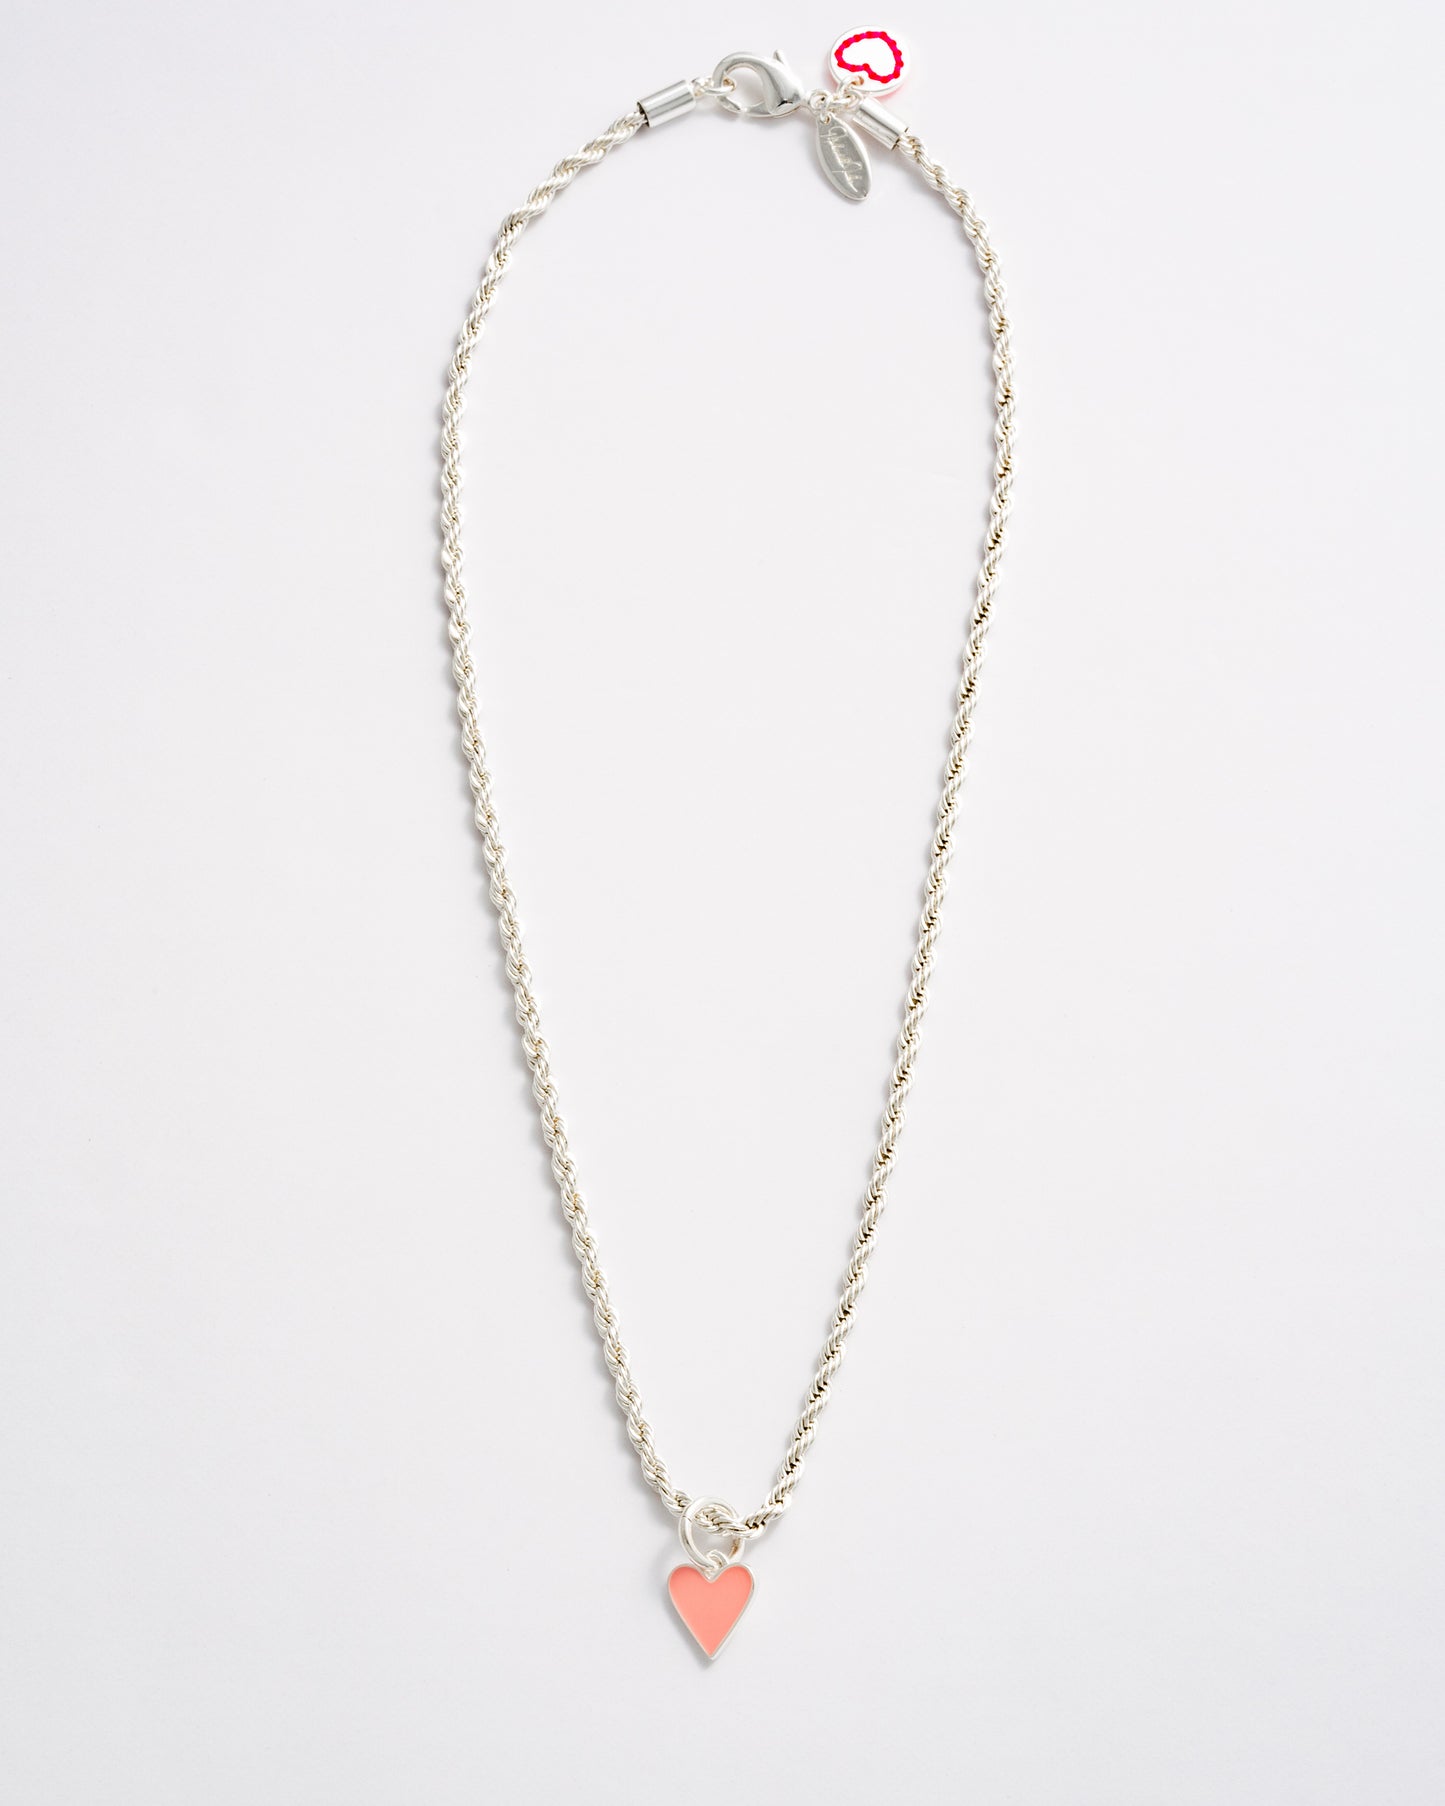 Load image into Gallery viewer, Pink Heart Charm
